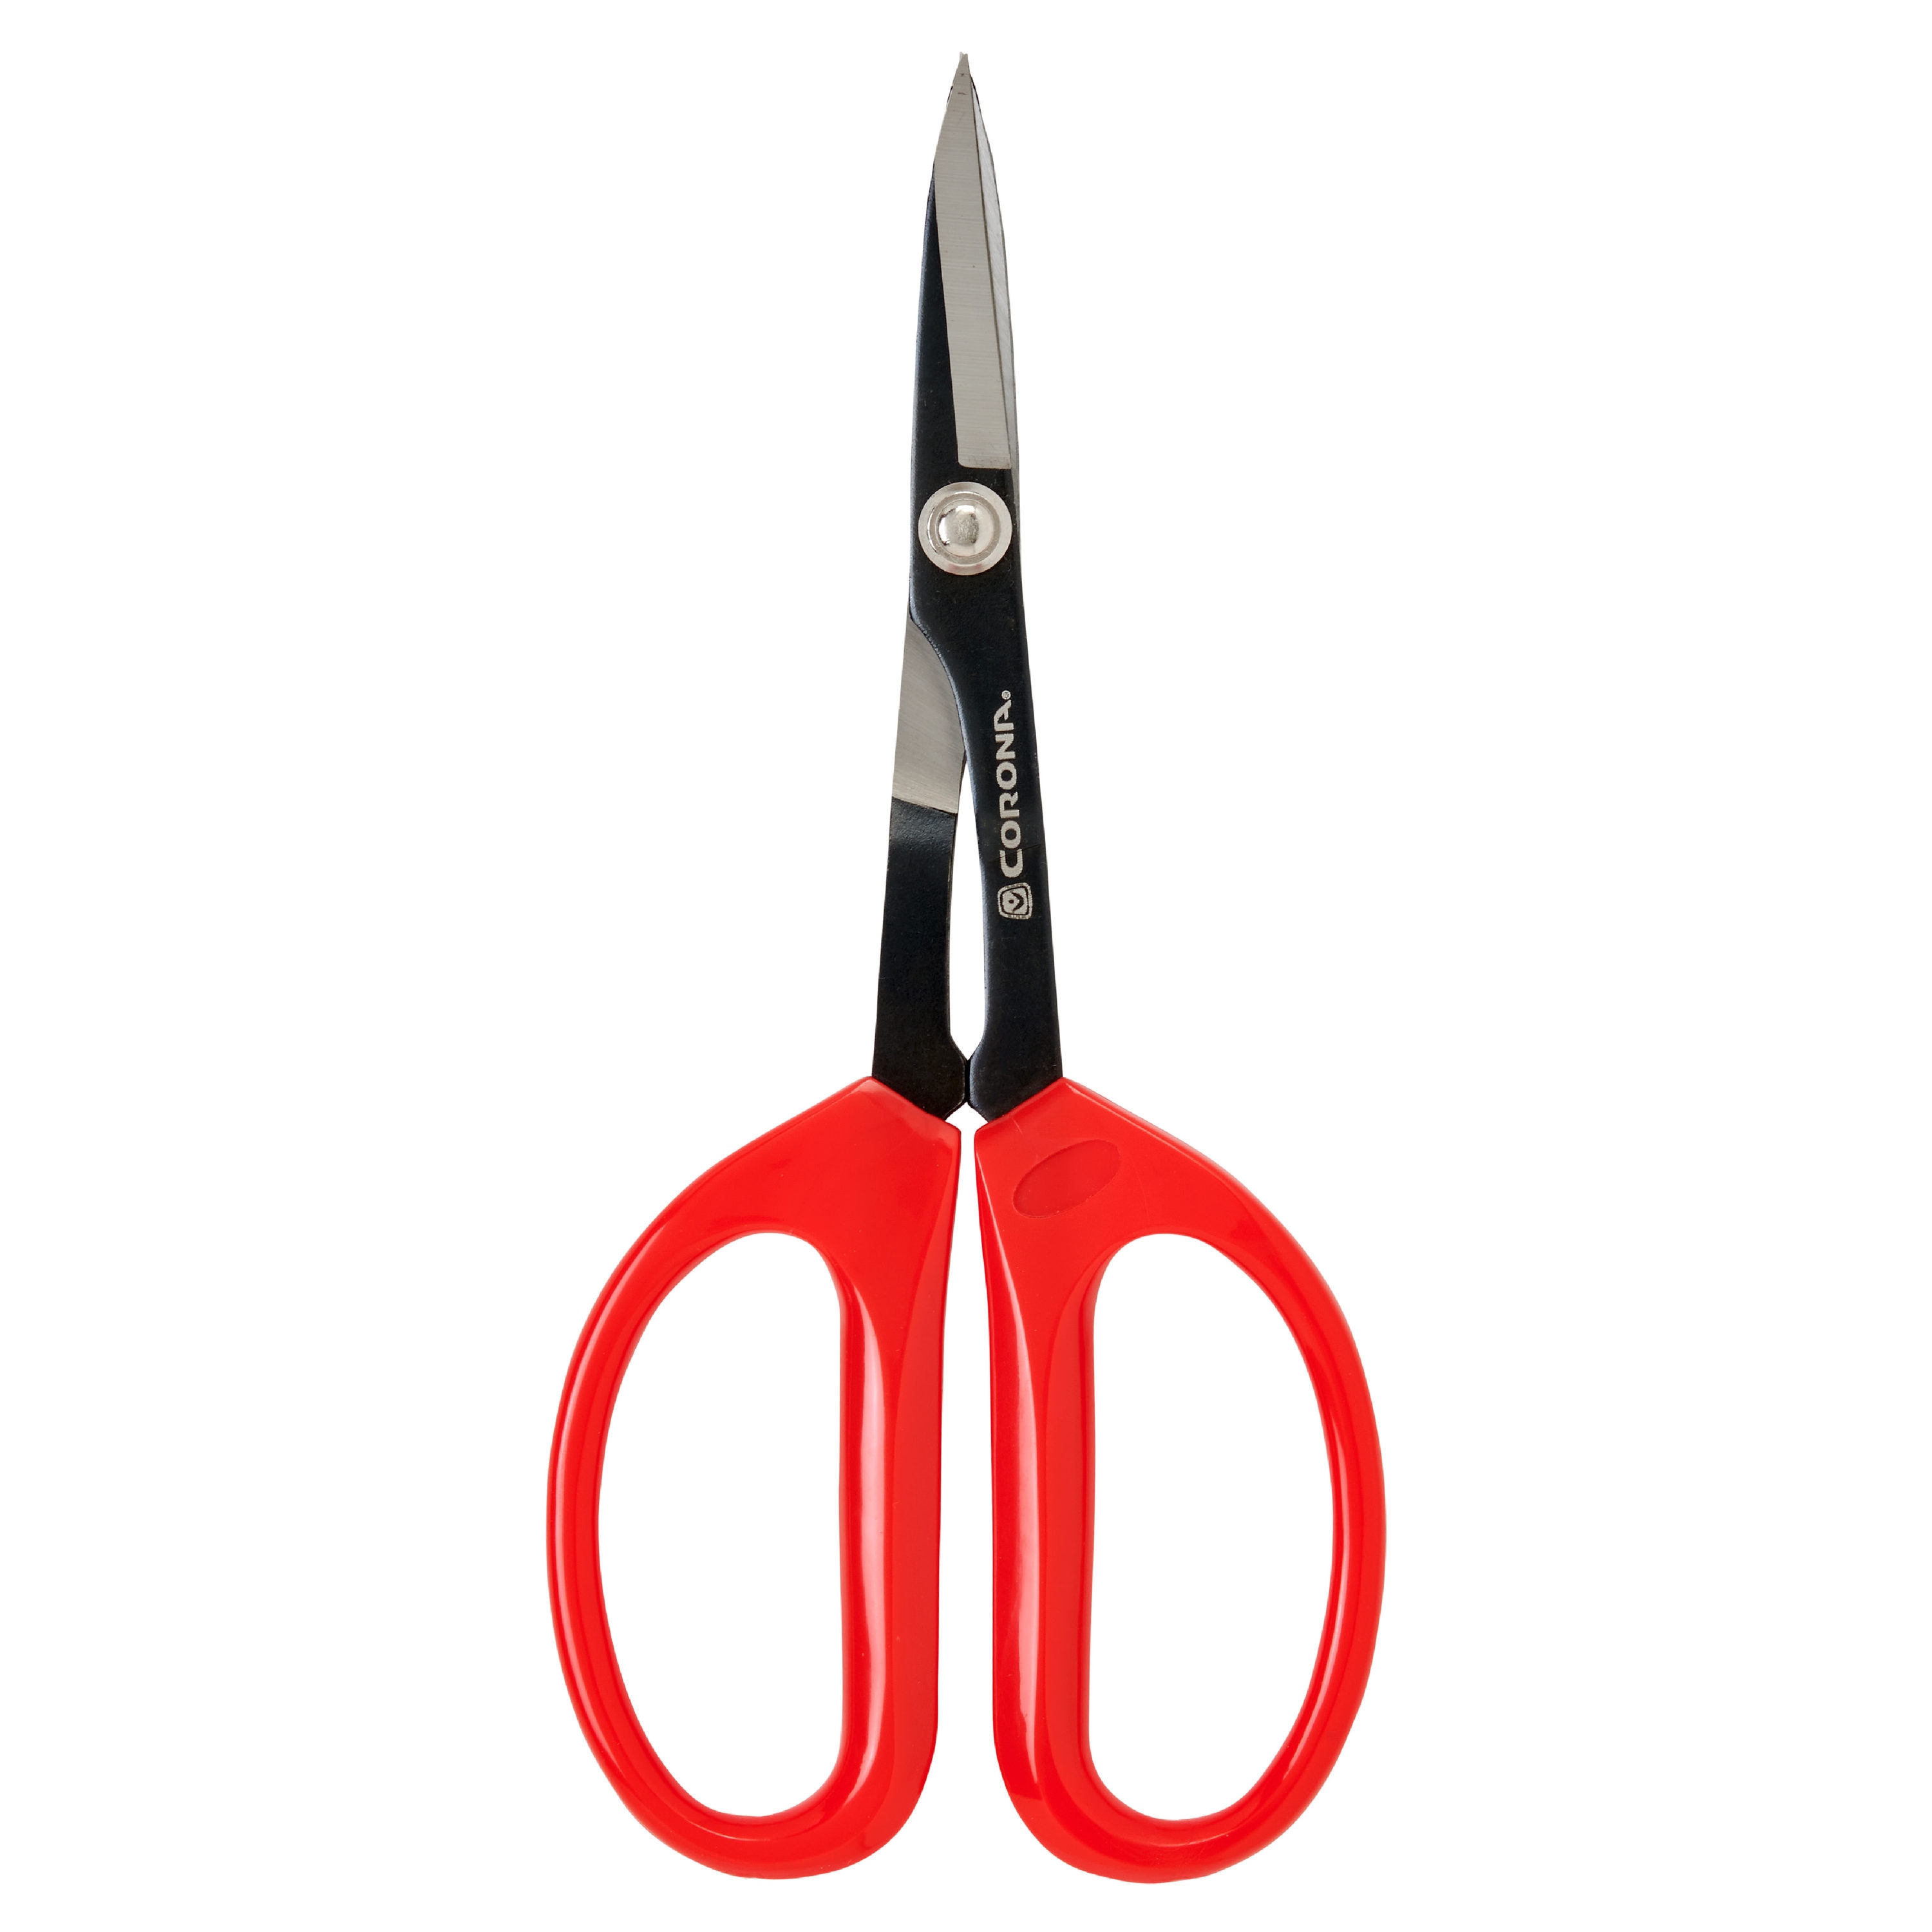 Universal Stainless Steel Scissors, 7 3/4 Length, 3 Cut, Bent Handle, Red, 3/Pack